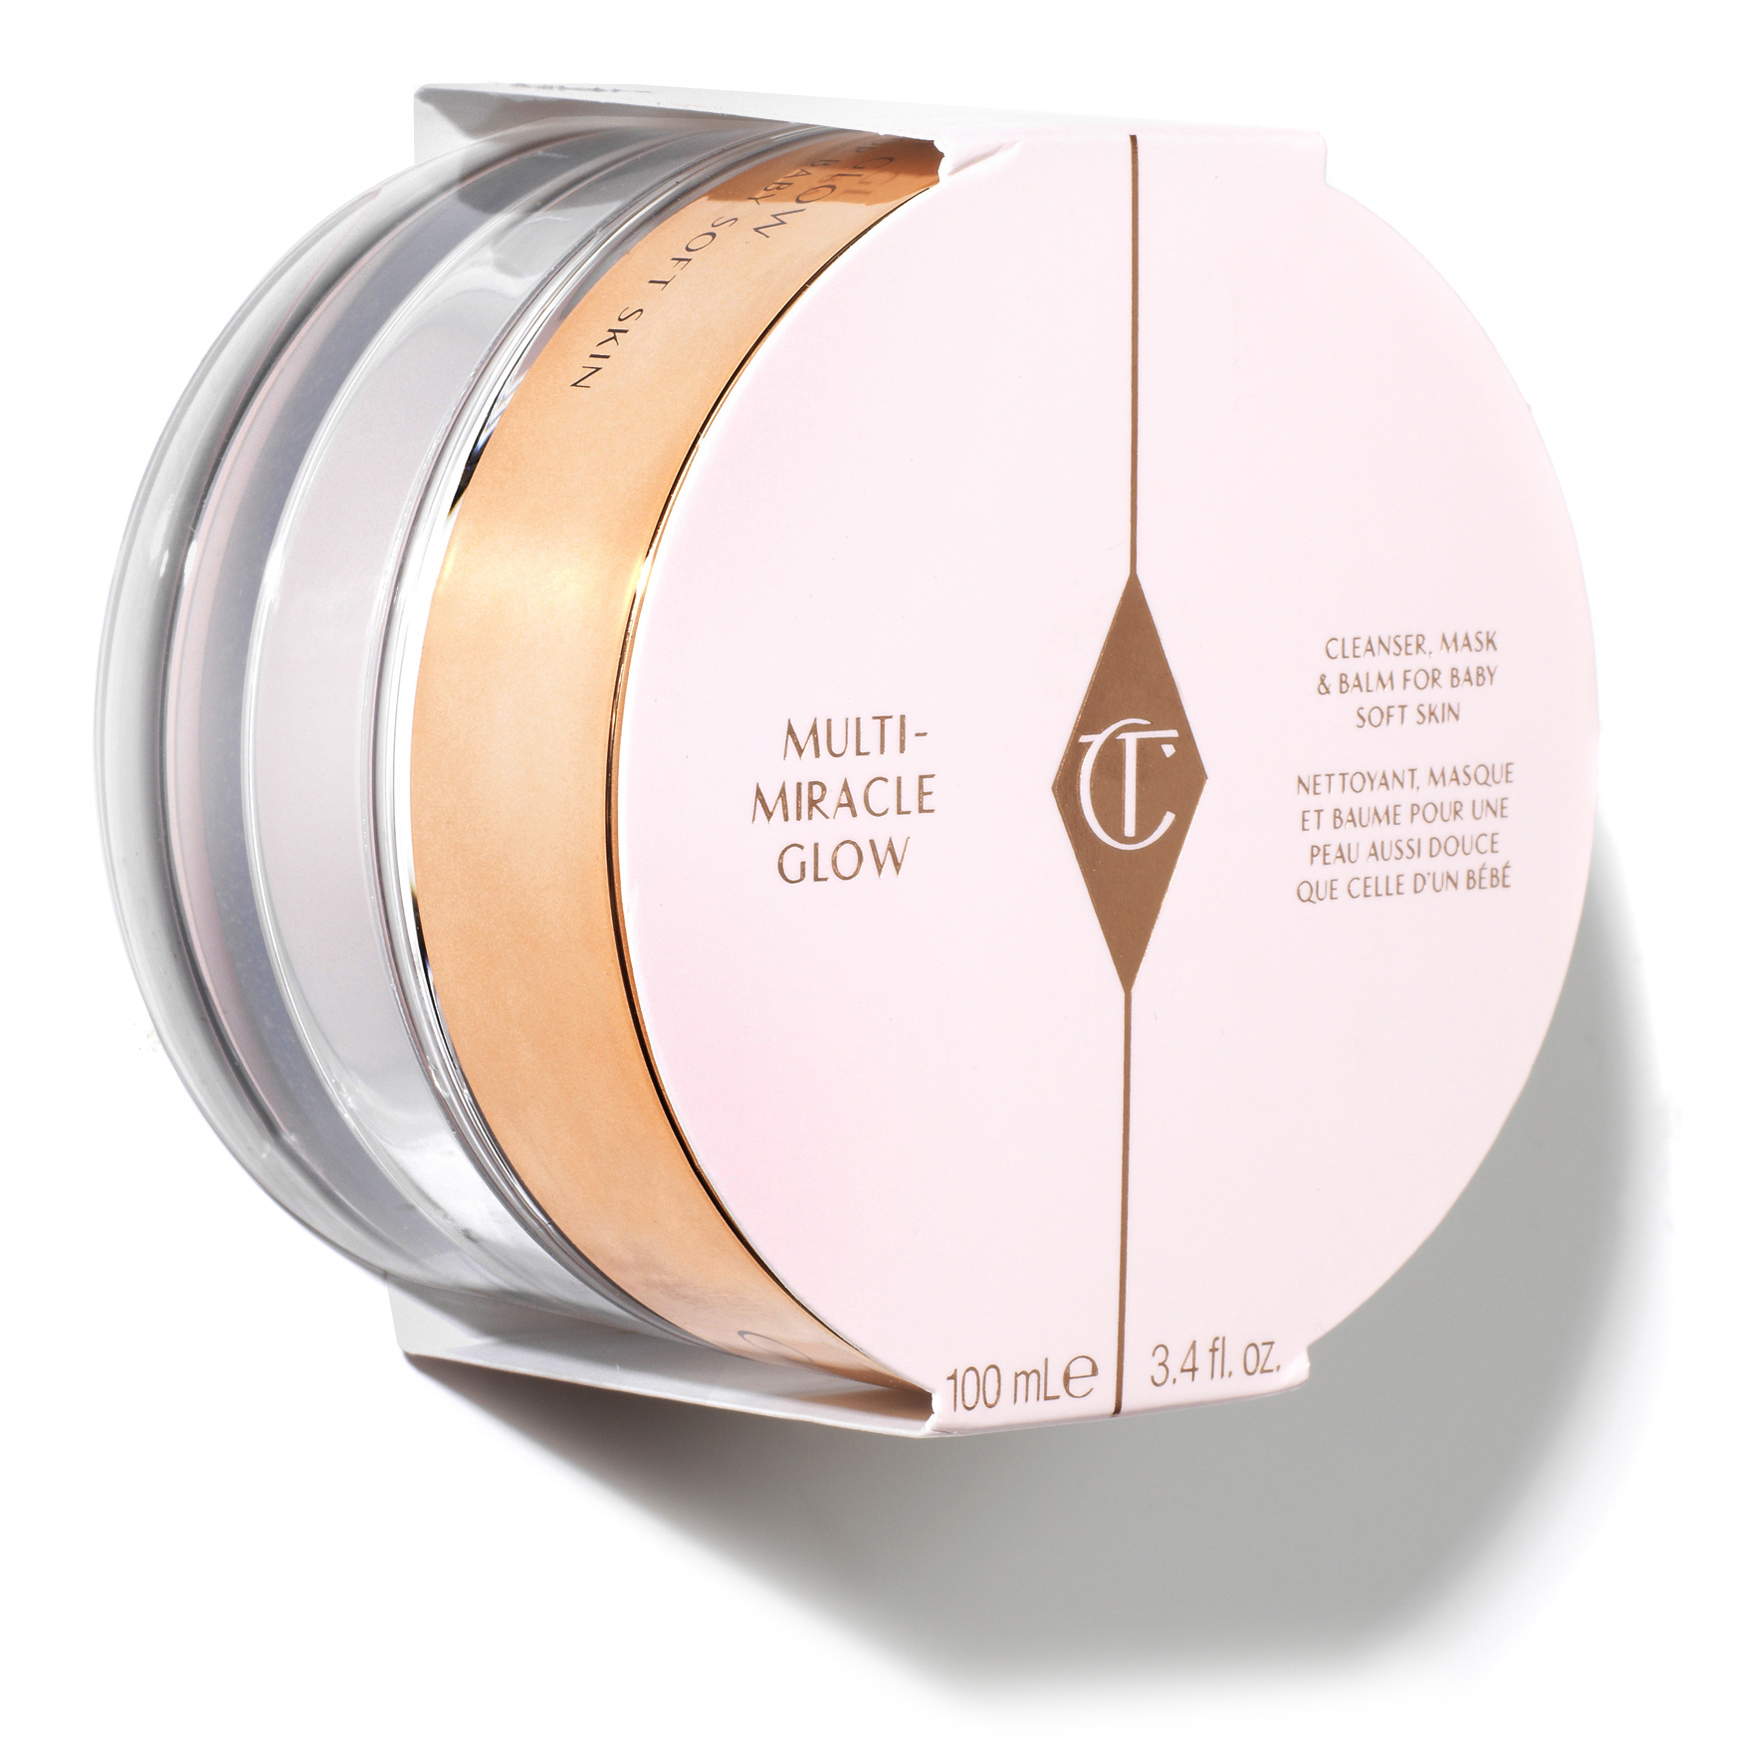 Glow clean activated. Miracle Glow. Nil Multi-Miracle Cleansing Balm Pore White. Glow & clean 5 in 1 age Miracle Multi .... Glow clean age Miracle.